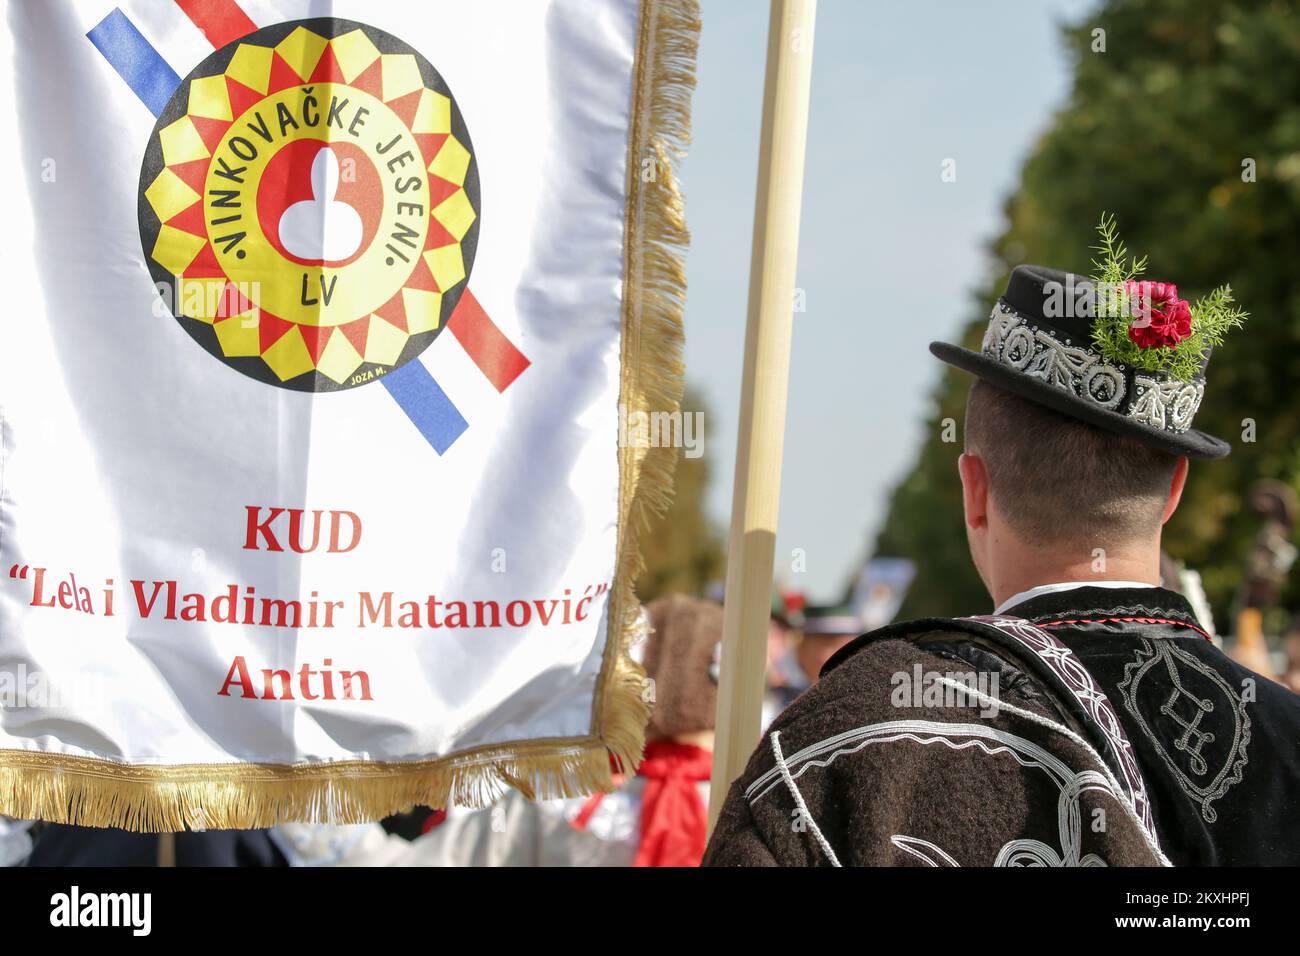 Participants dressed in traditional folk costumes during the parade of the 55th Vinkovci Autumn Festival, in Vinkovci, Croatia, on September 20, 2020. Vinkovci Autumn festival is a celebration of the Slavonian lifestyle, habits and culture and aims to give festival-goers an insight into all things Slavonian - including food, dance, music, costume and dialects. Photo: Dubravka Petric/PIXSELL Stock Photo